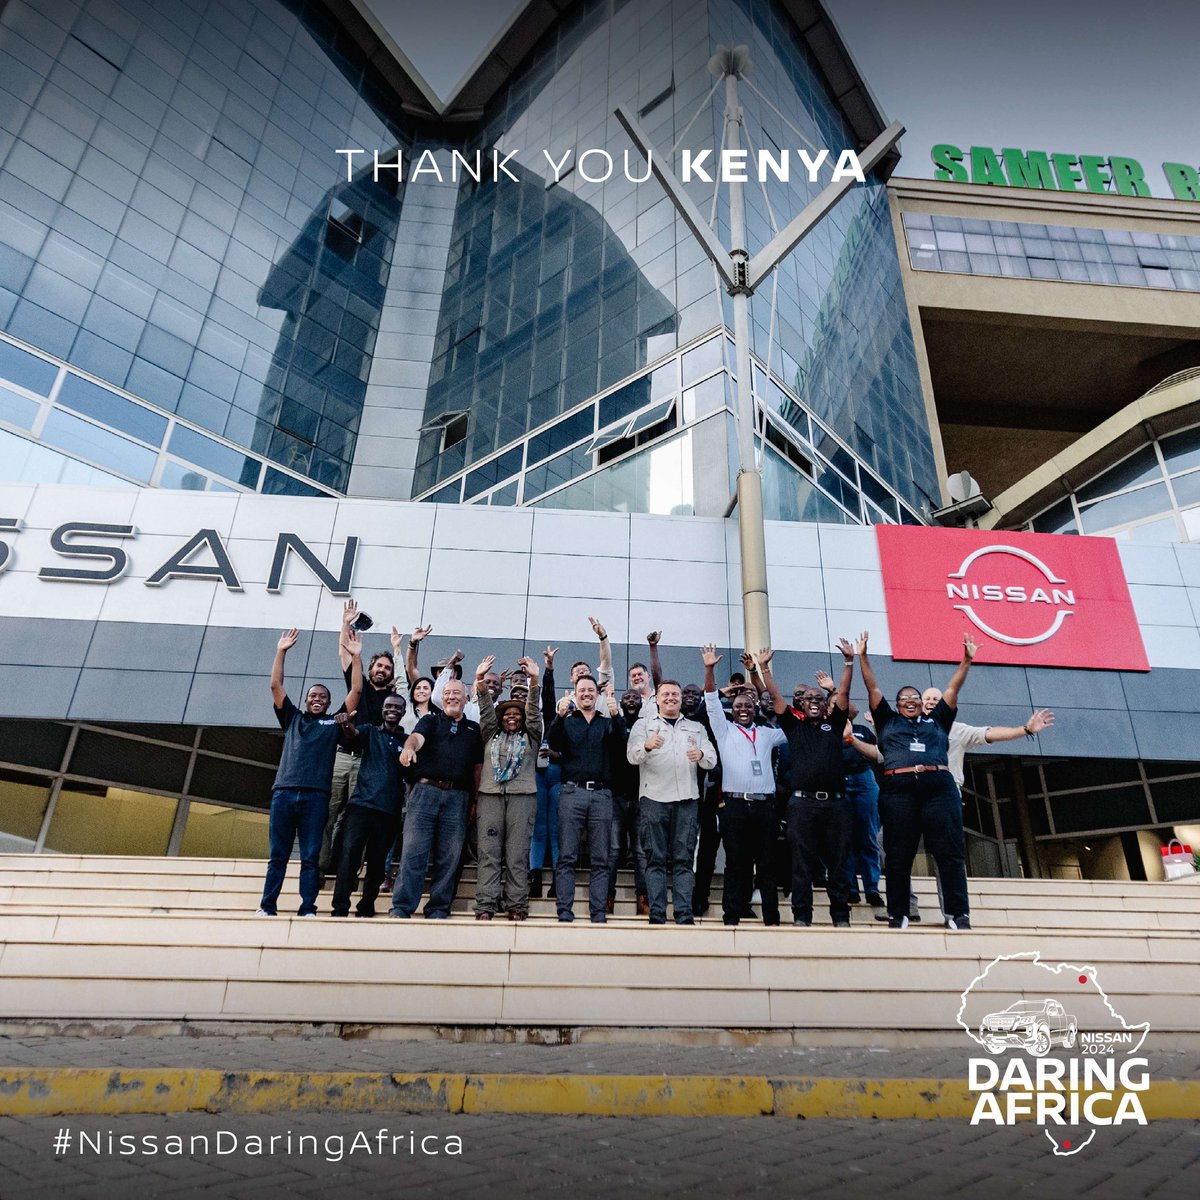 1/2 Daring Africa 2024, Nissan’s overland adventure across eight countries has completed its Kenya leg, the expedition’s penultimate stop before transitioning to Egypt. Kenya wow you really are a spectacular end point for our first expedition phase.